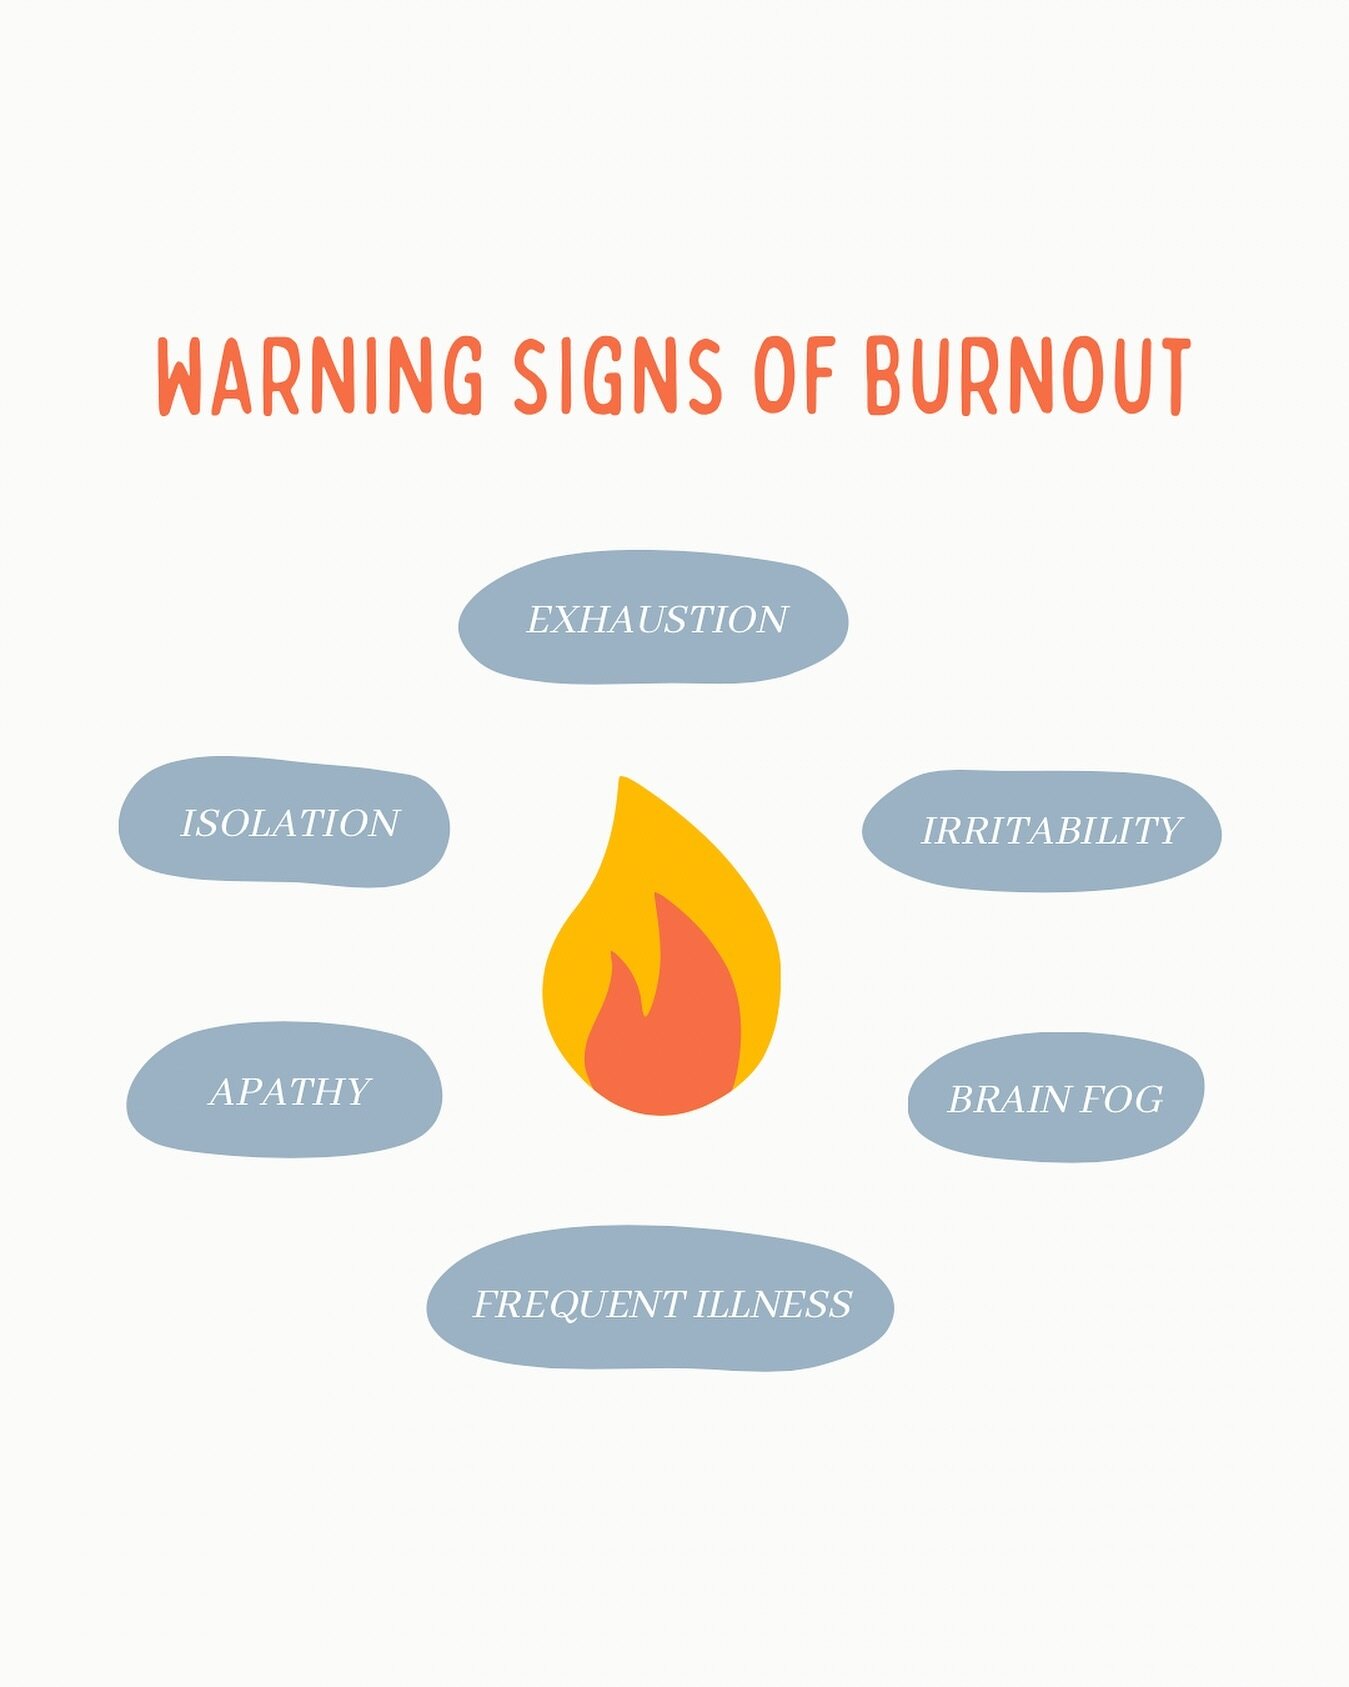 Too much Stress with little to no release leads to overwhelmed. Feeling overwhelmed for an extended period of time leads to burnout. Save this post to help keep you aware of the signs of burnout  so you can help yourself before you get to the burnout